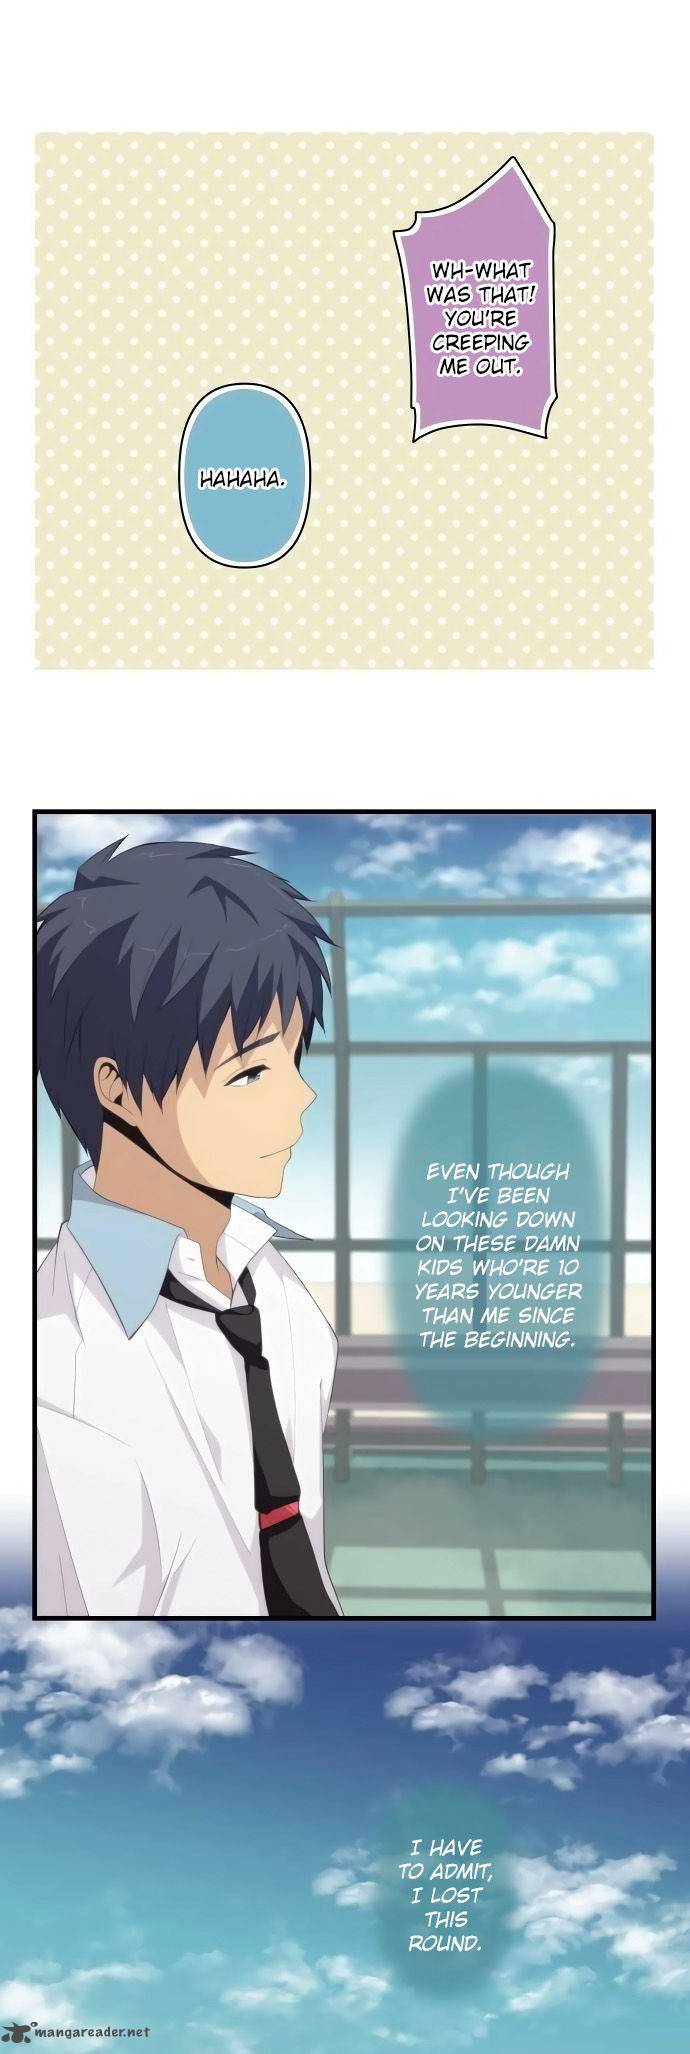 Relife 146 5